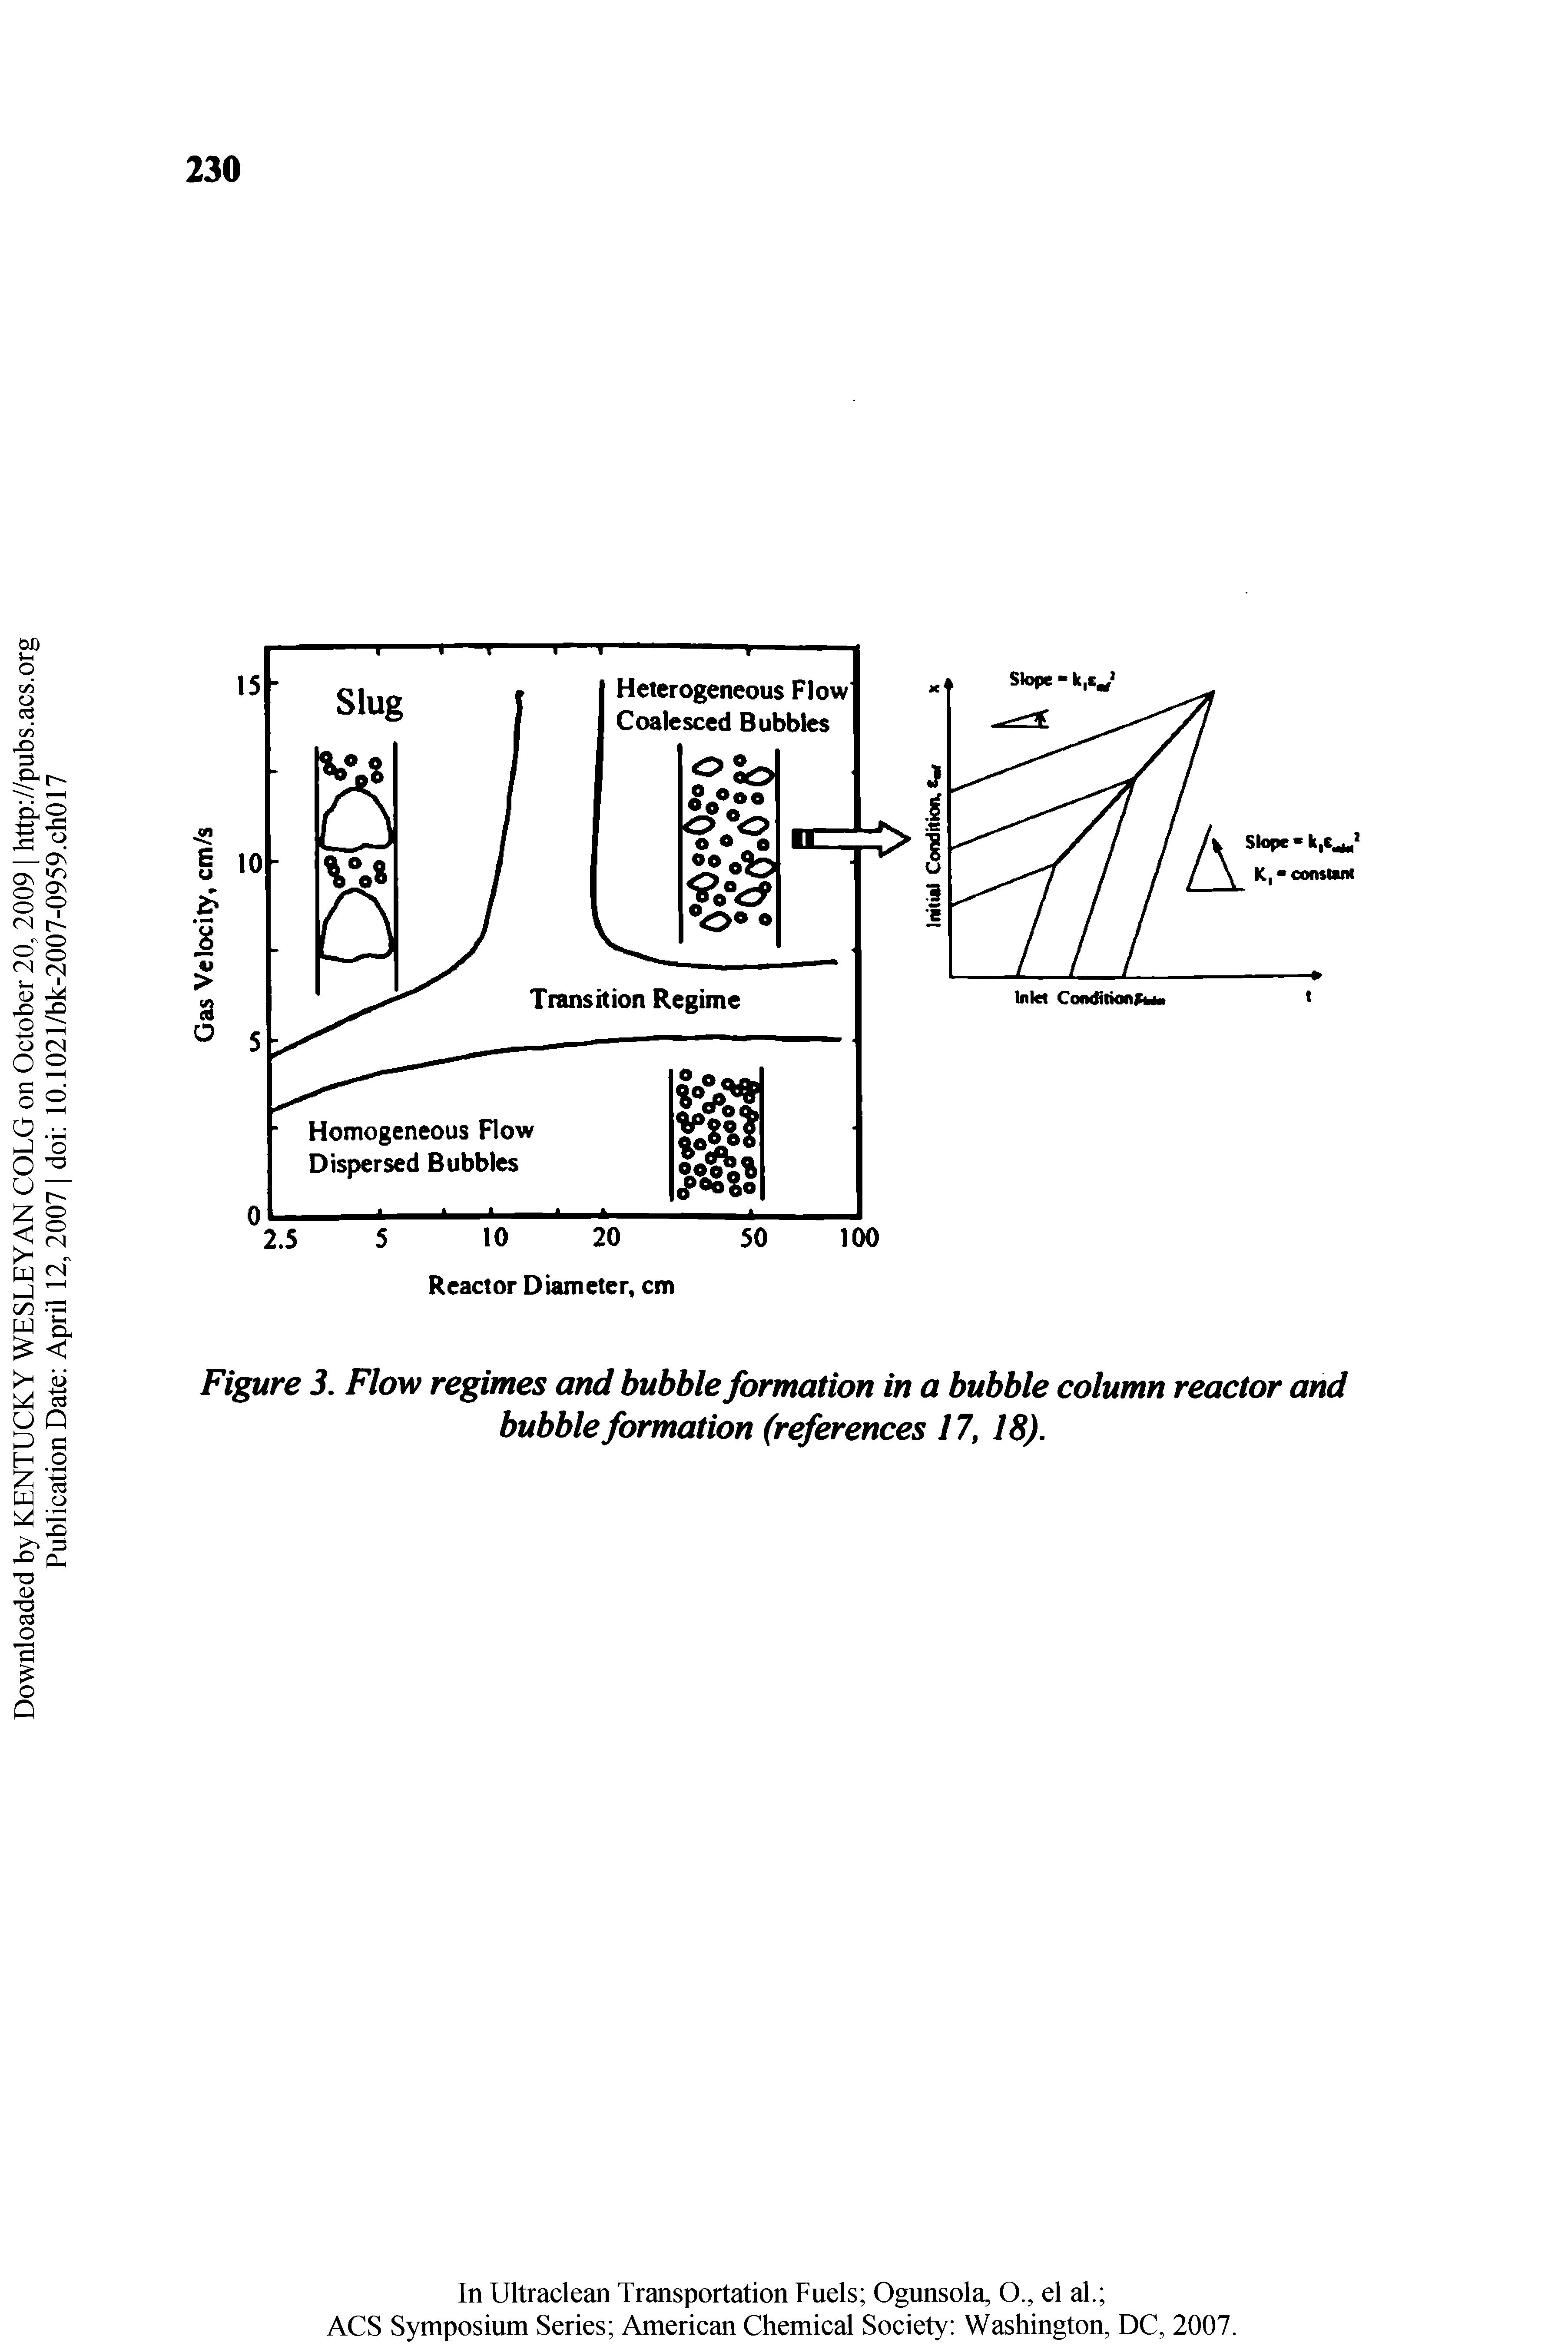 Figure 3. Flow regimes and bubble formation in a bubble column reactor and bubble formation (references 17, 18).